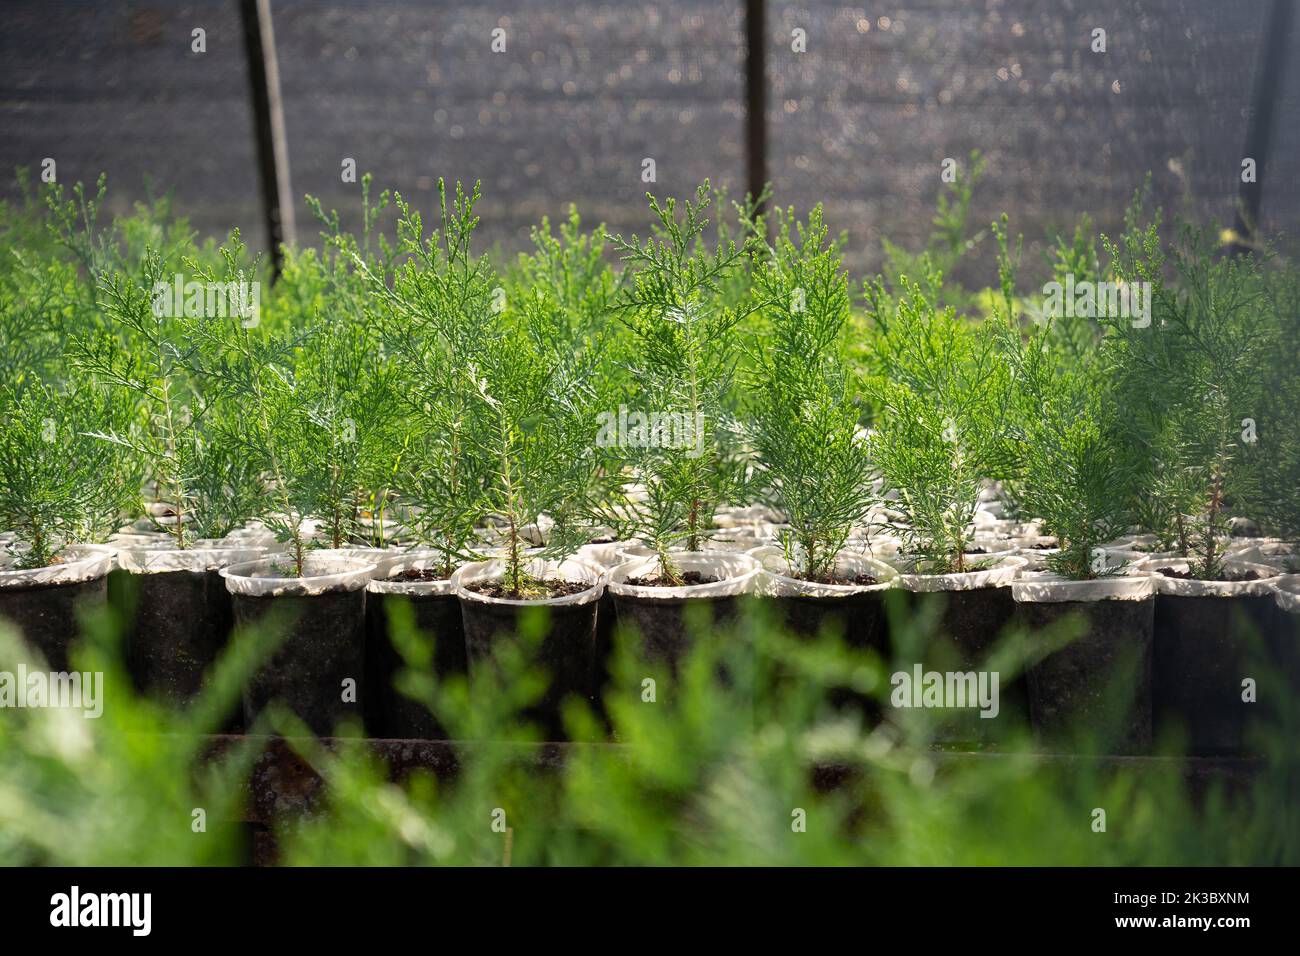 Green thuja seedlings grow in a greenhouse and special pots, cultivated for sale or house decor Stock Photo